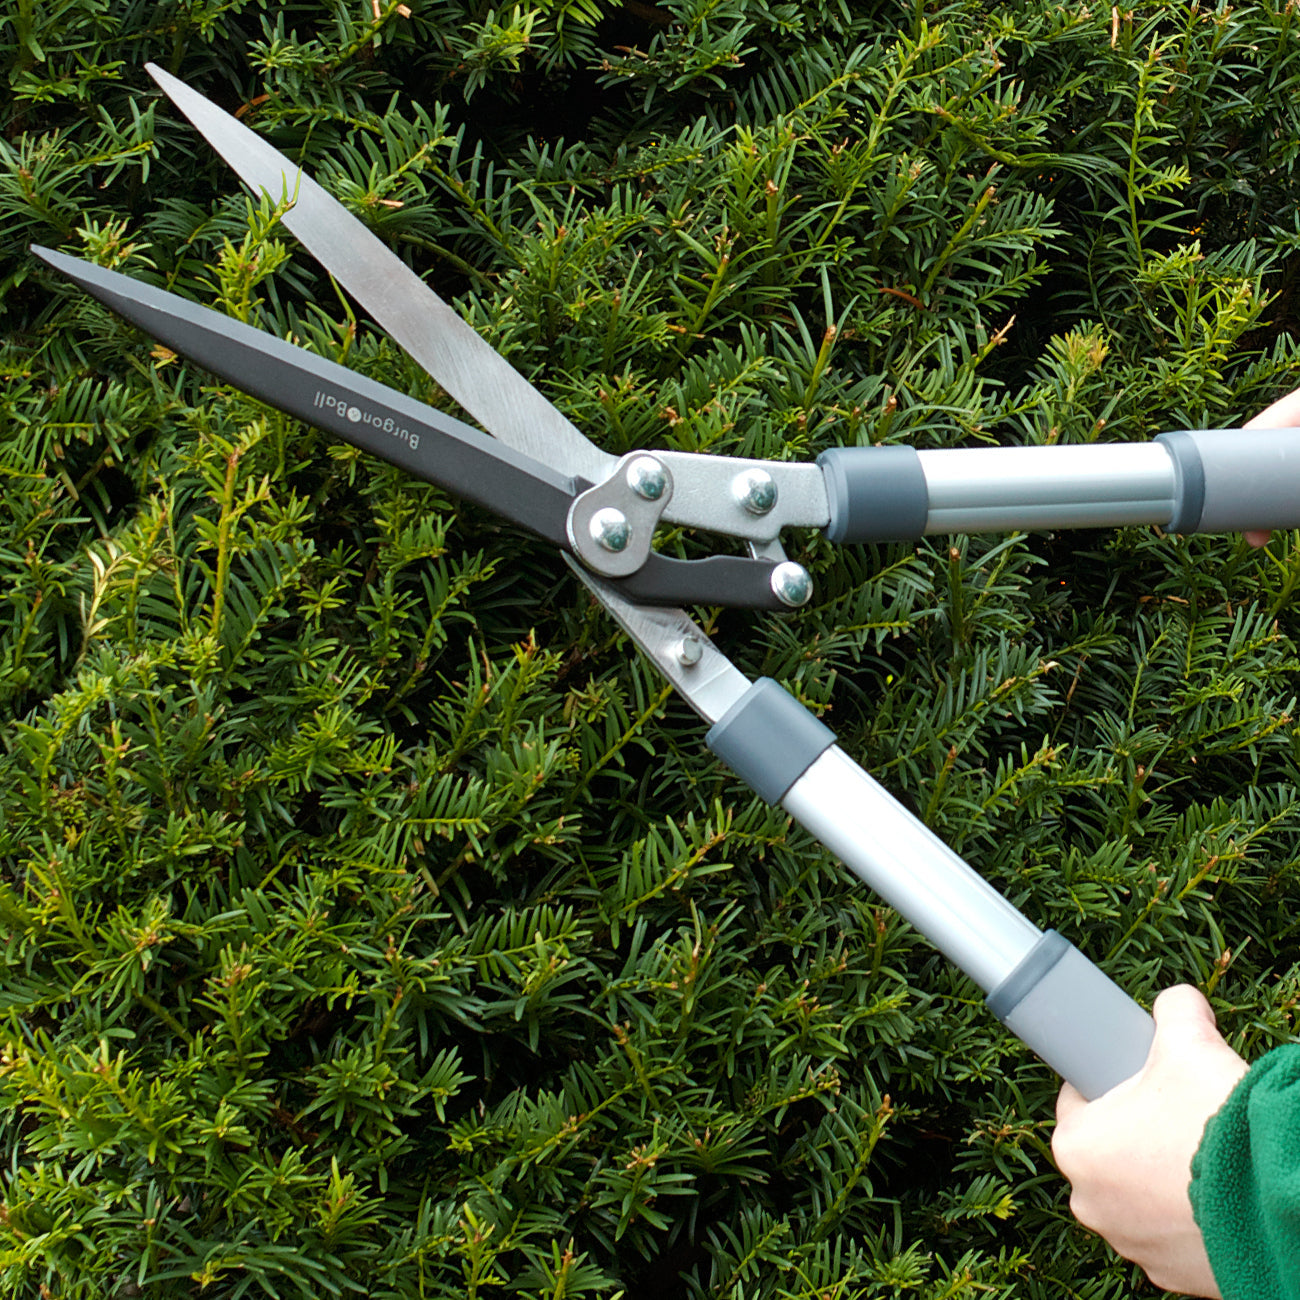 Trimming Hedges with Burgon & Ball RHS-Endorsed Hedge Shear